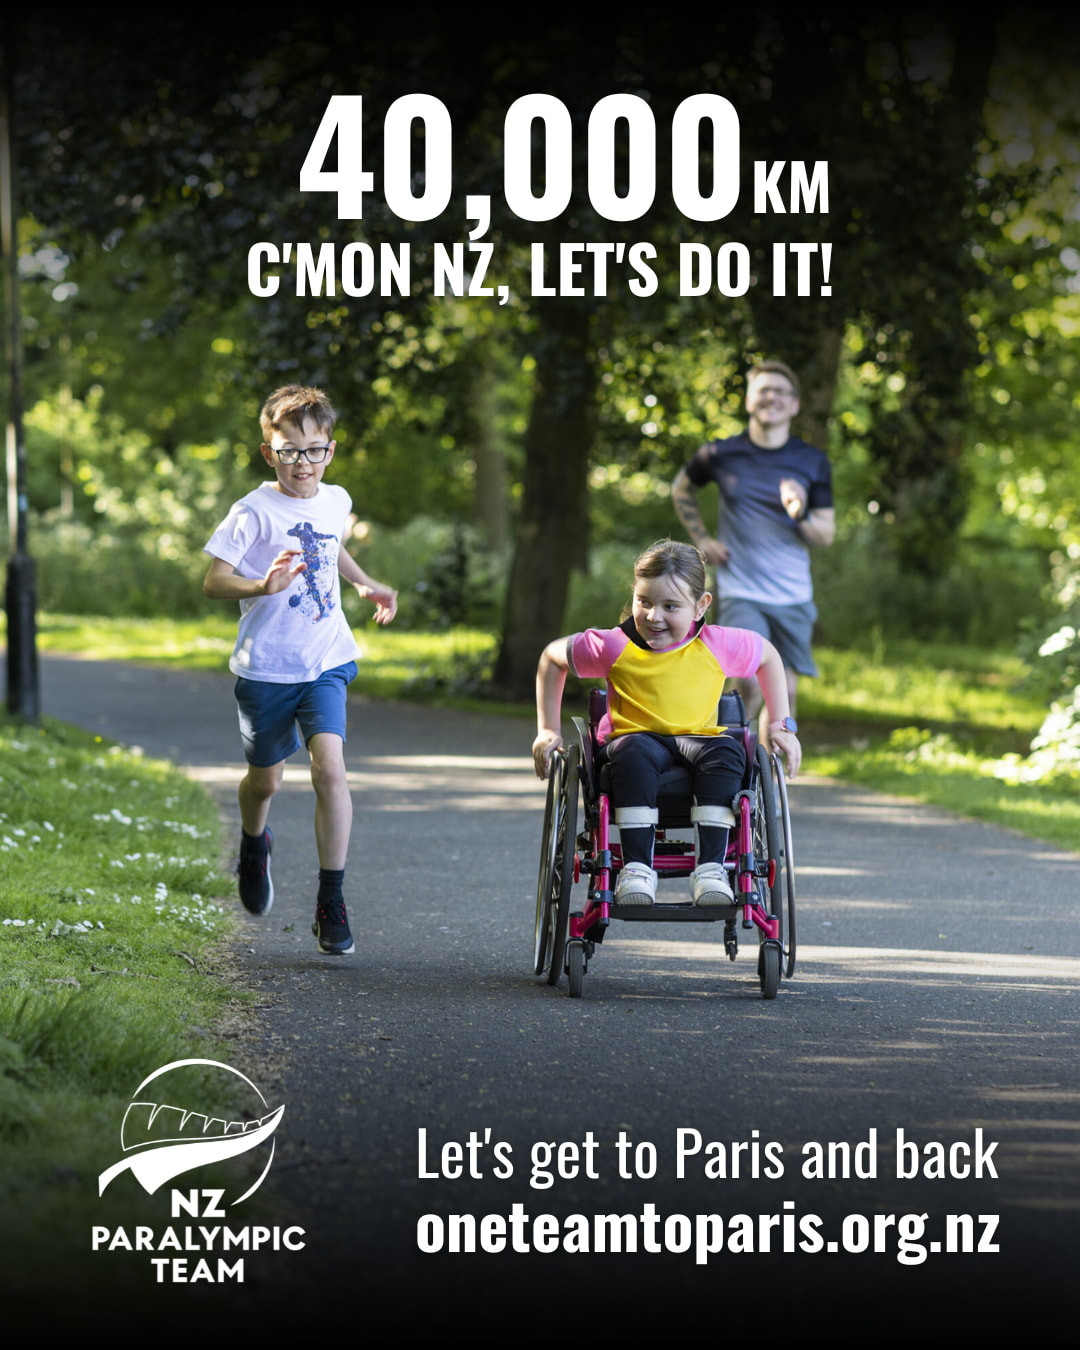 Paralympics New Zealand sets virtual 40,000km target for residents to boost Paris 2024 preparations